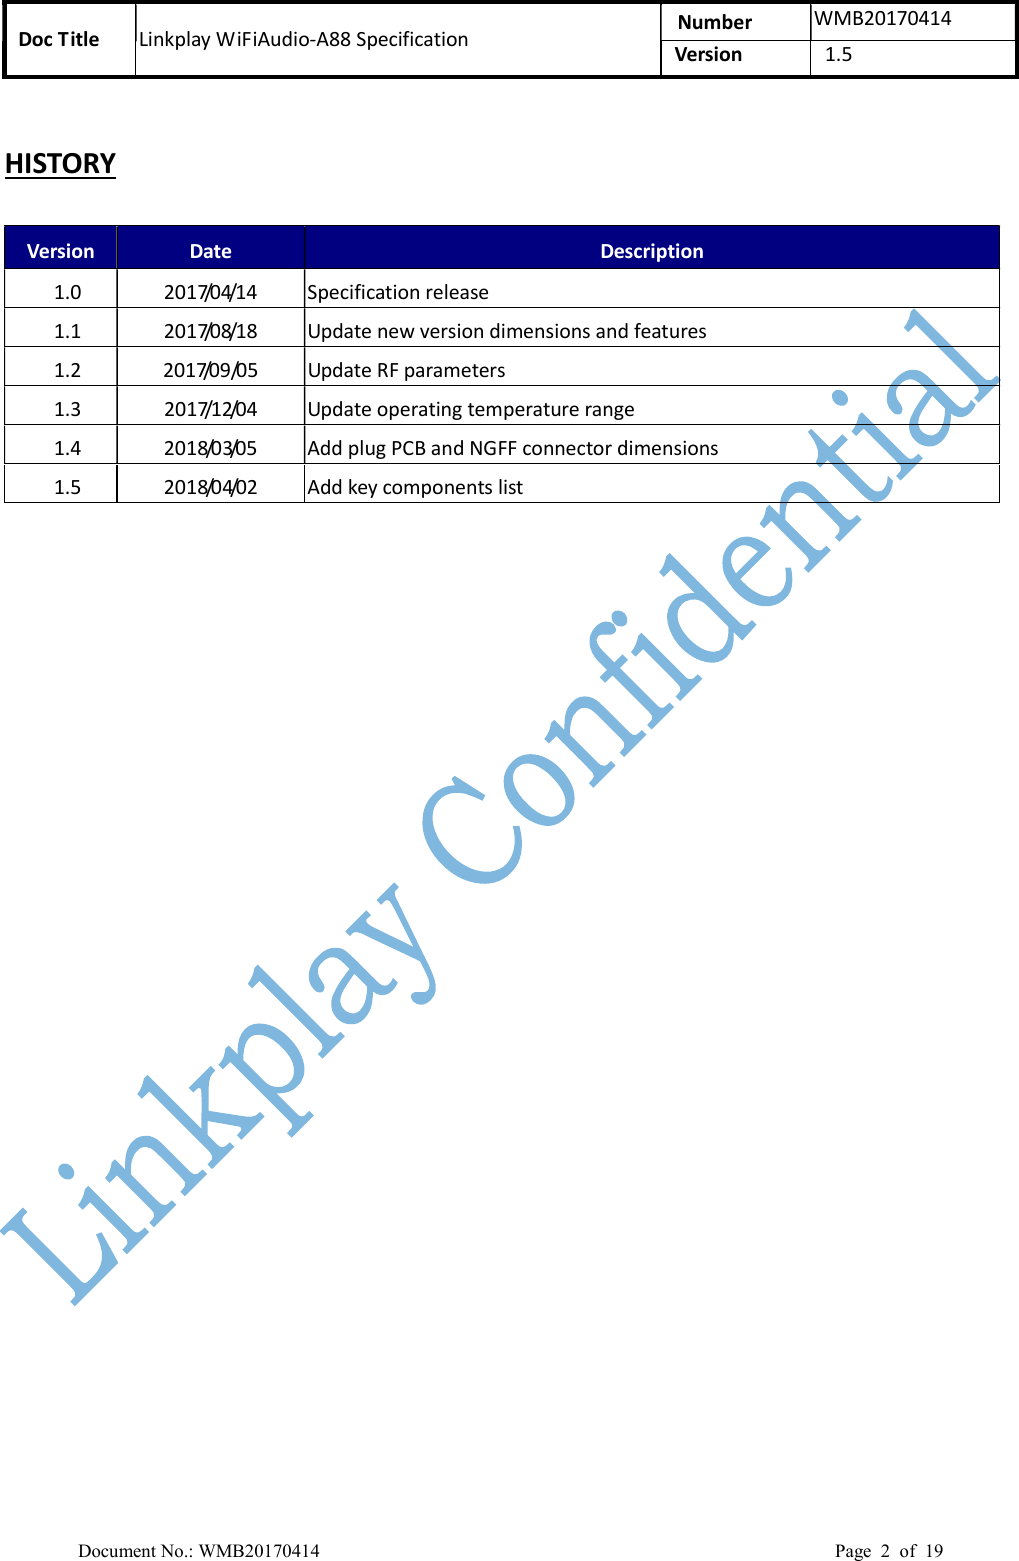 Doc Title  Linkplay WiFiAudio-A88 Specification  Number  WMB20170414 Version    1.5  Document No.: WMB20170414    Page  2  of  19 HISTORY Version  Date  Description 1.0  2017/04/14  Specification release 1.1  2017/08/18  Update new version dimensions and features 1.2  2017/09/05  Update RF parameters 1.3  2017/12/04  Update operating temperature range 1.4  2018/03/05  Add plug PCB and NGFF connector dimensions 1.5  2018/04/02  Add key components list   